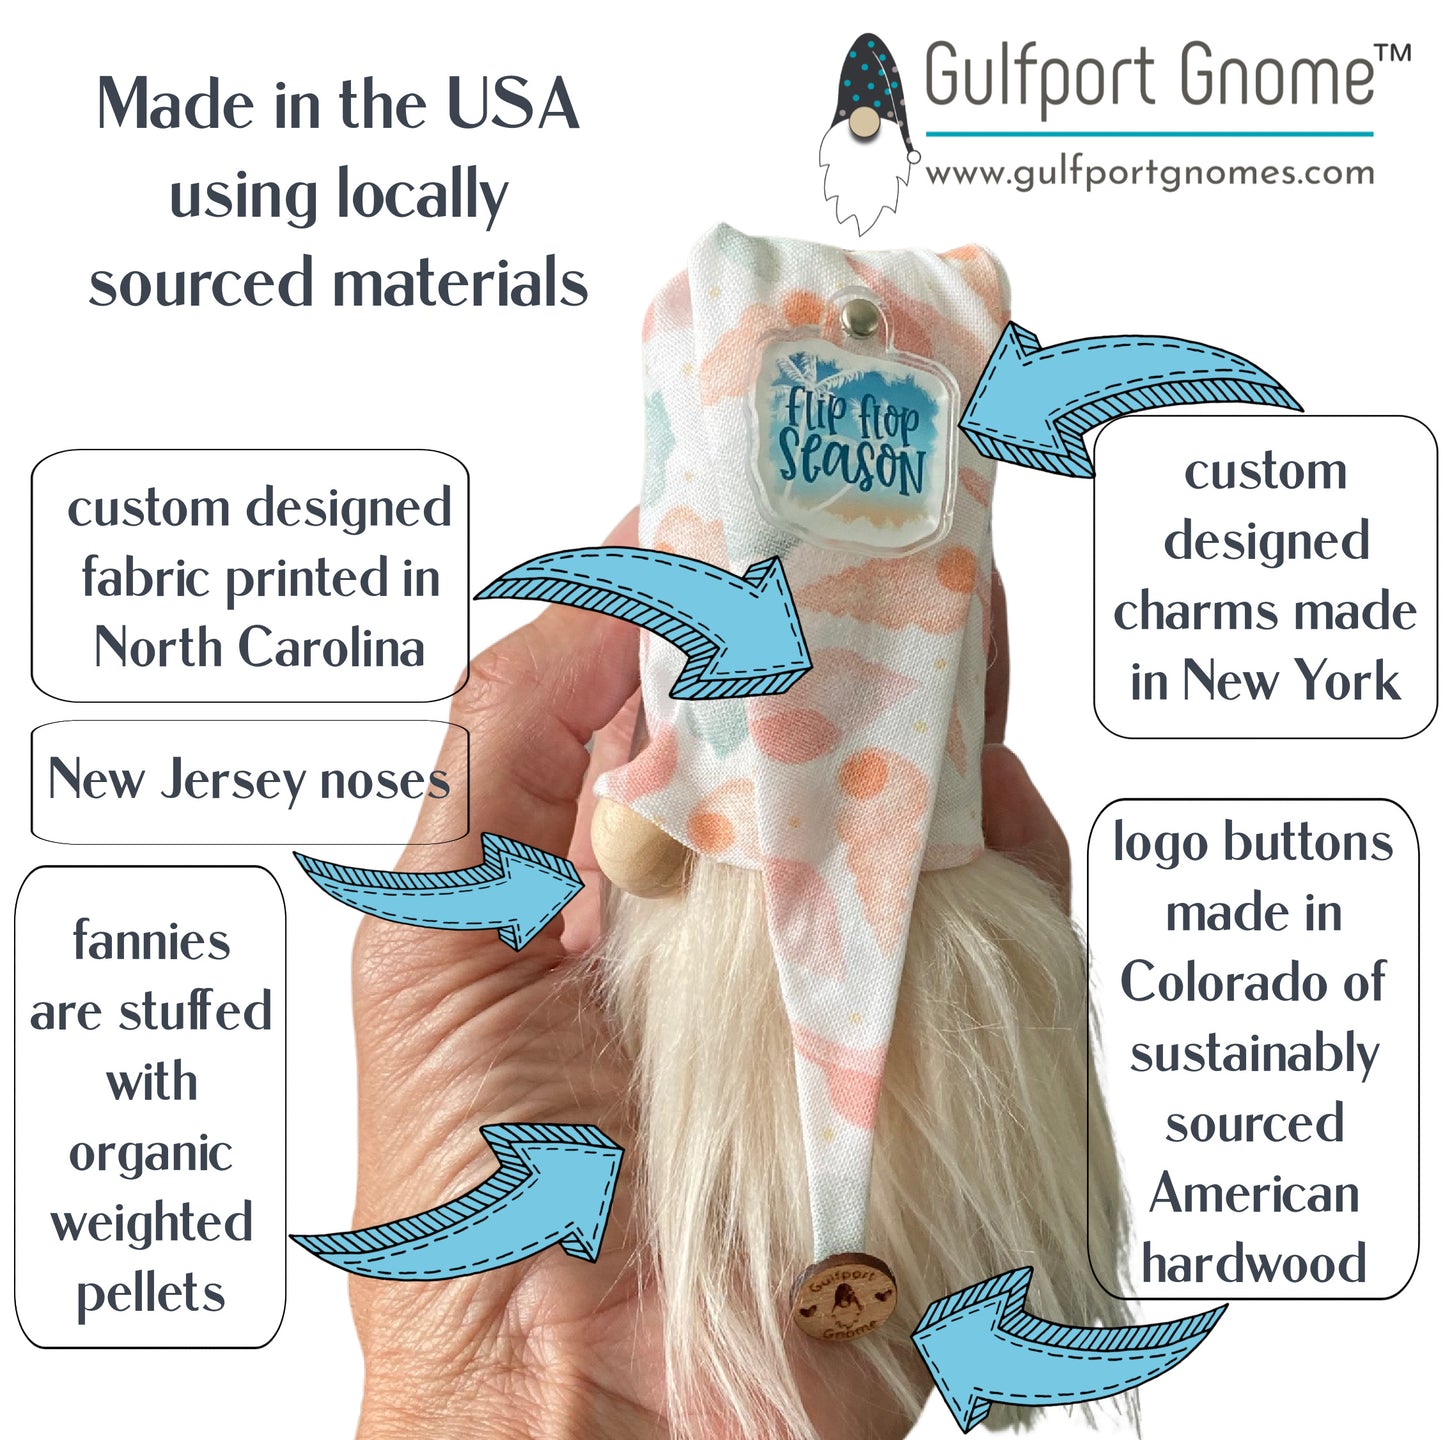 Gift Set - Appreciate YOU Gnome and Flower Gift set with Gulfport Gnome™ - 4" Plush Gnome